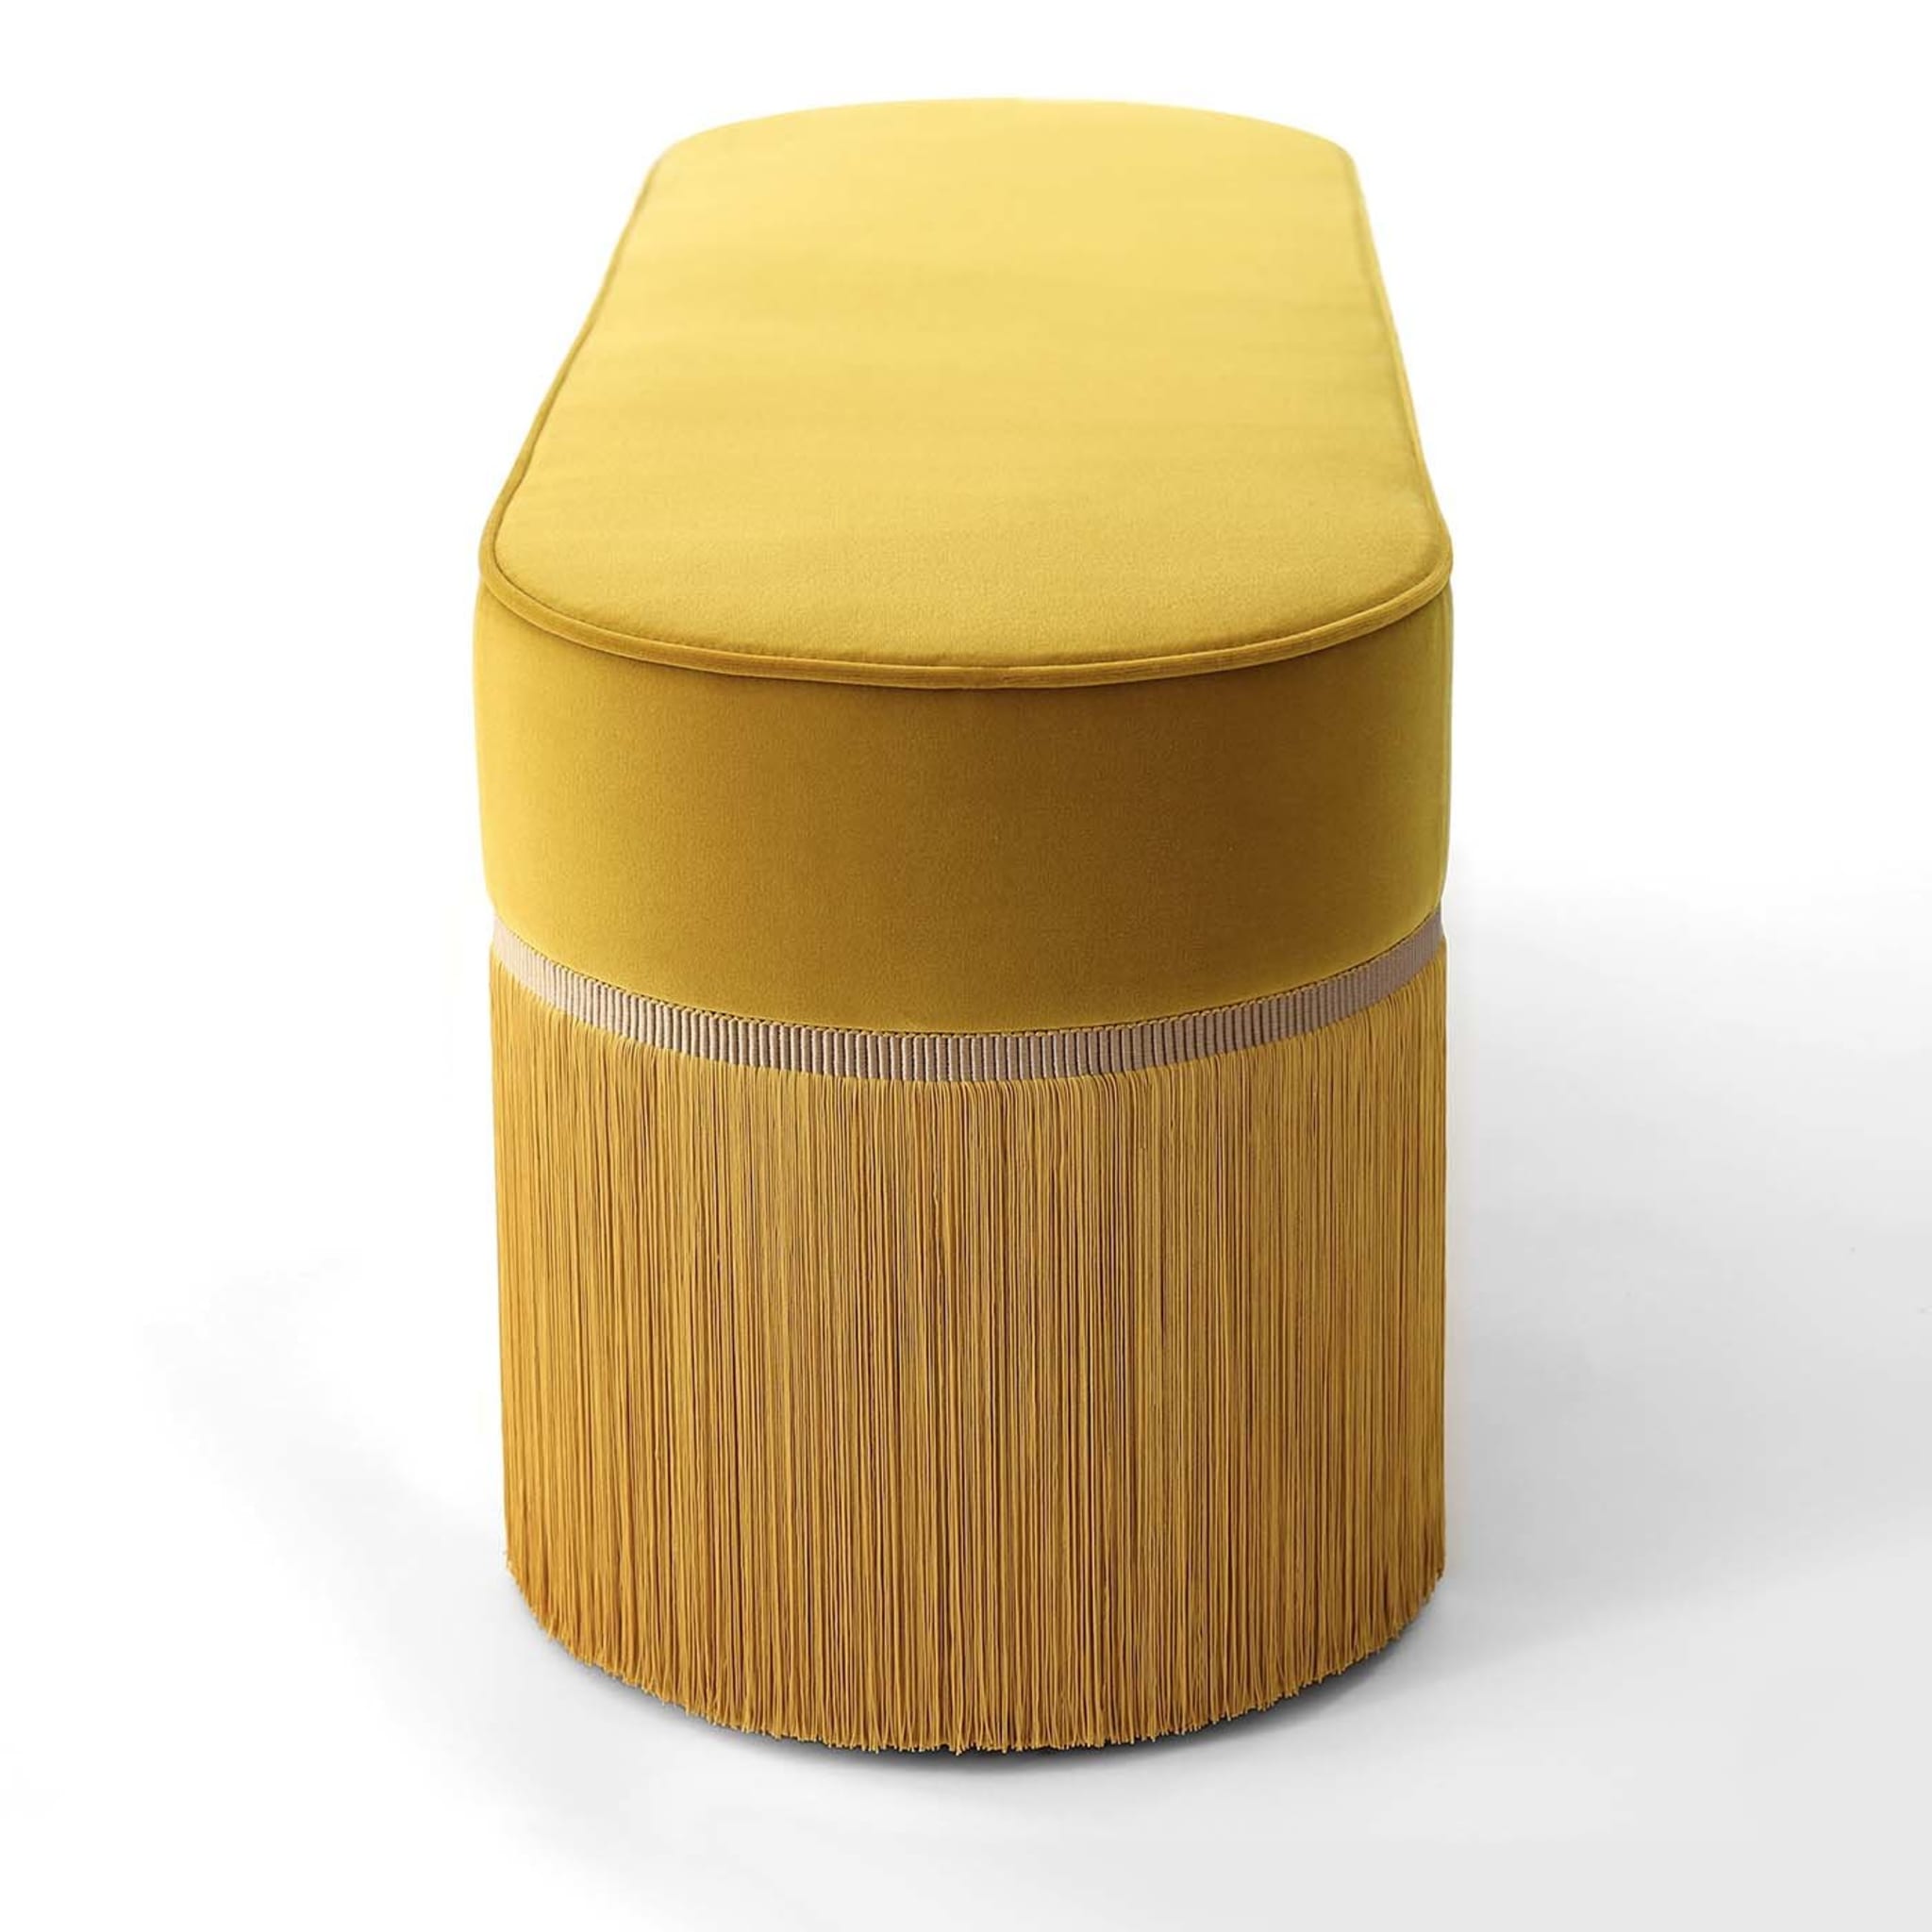 Couture Yellow Bench - Alternative view 1